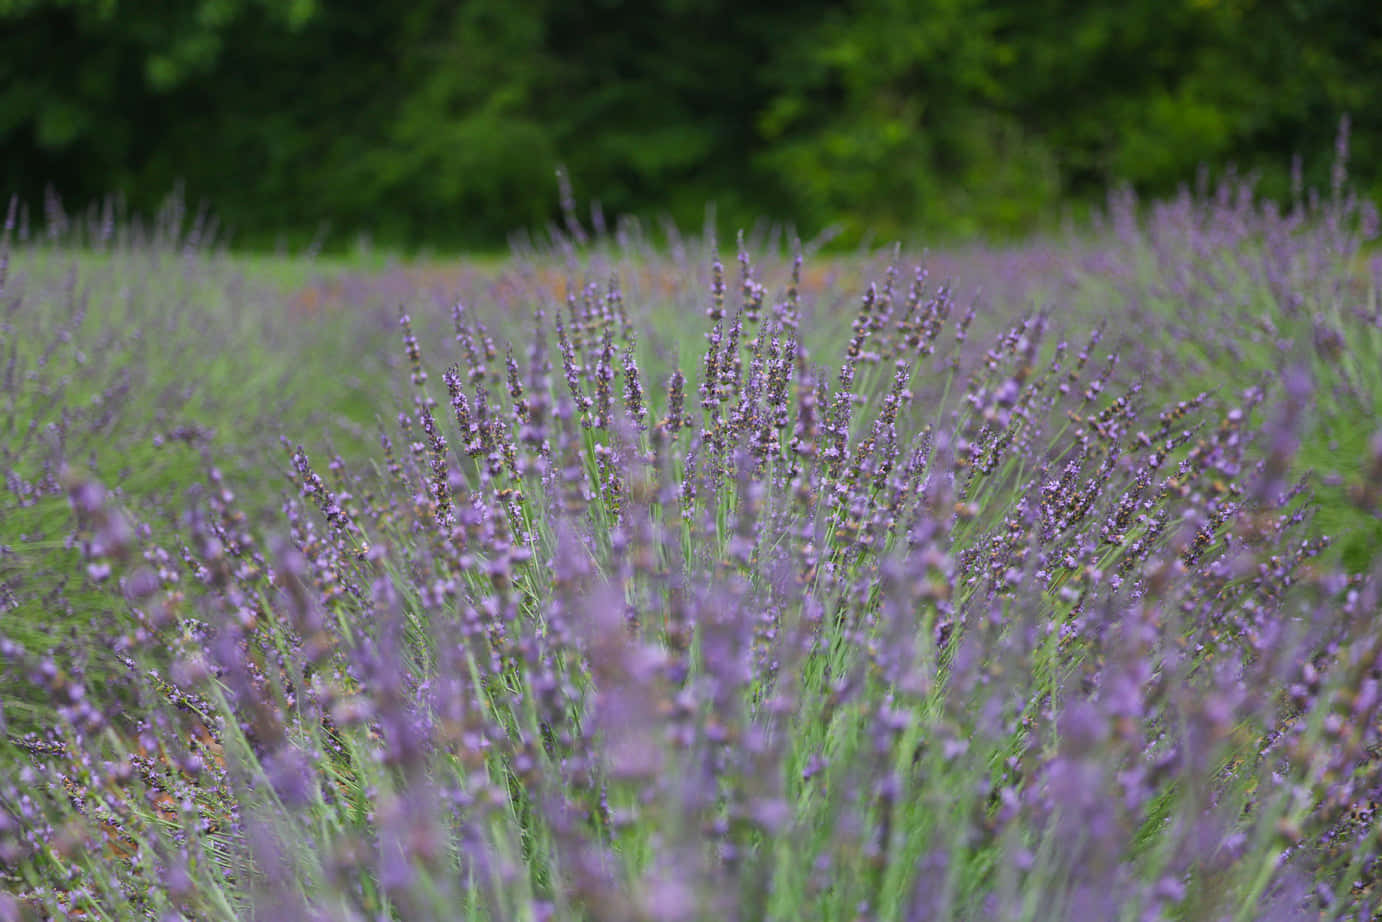 Lavender Field in the French Countryside - A Picture Perfect Place of Solitude